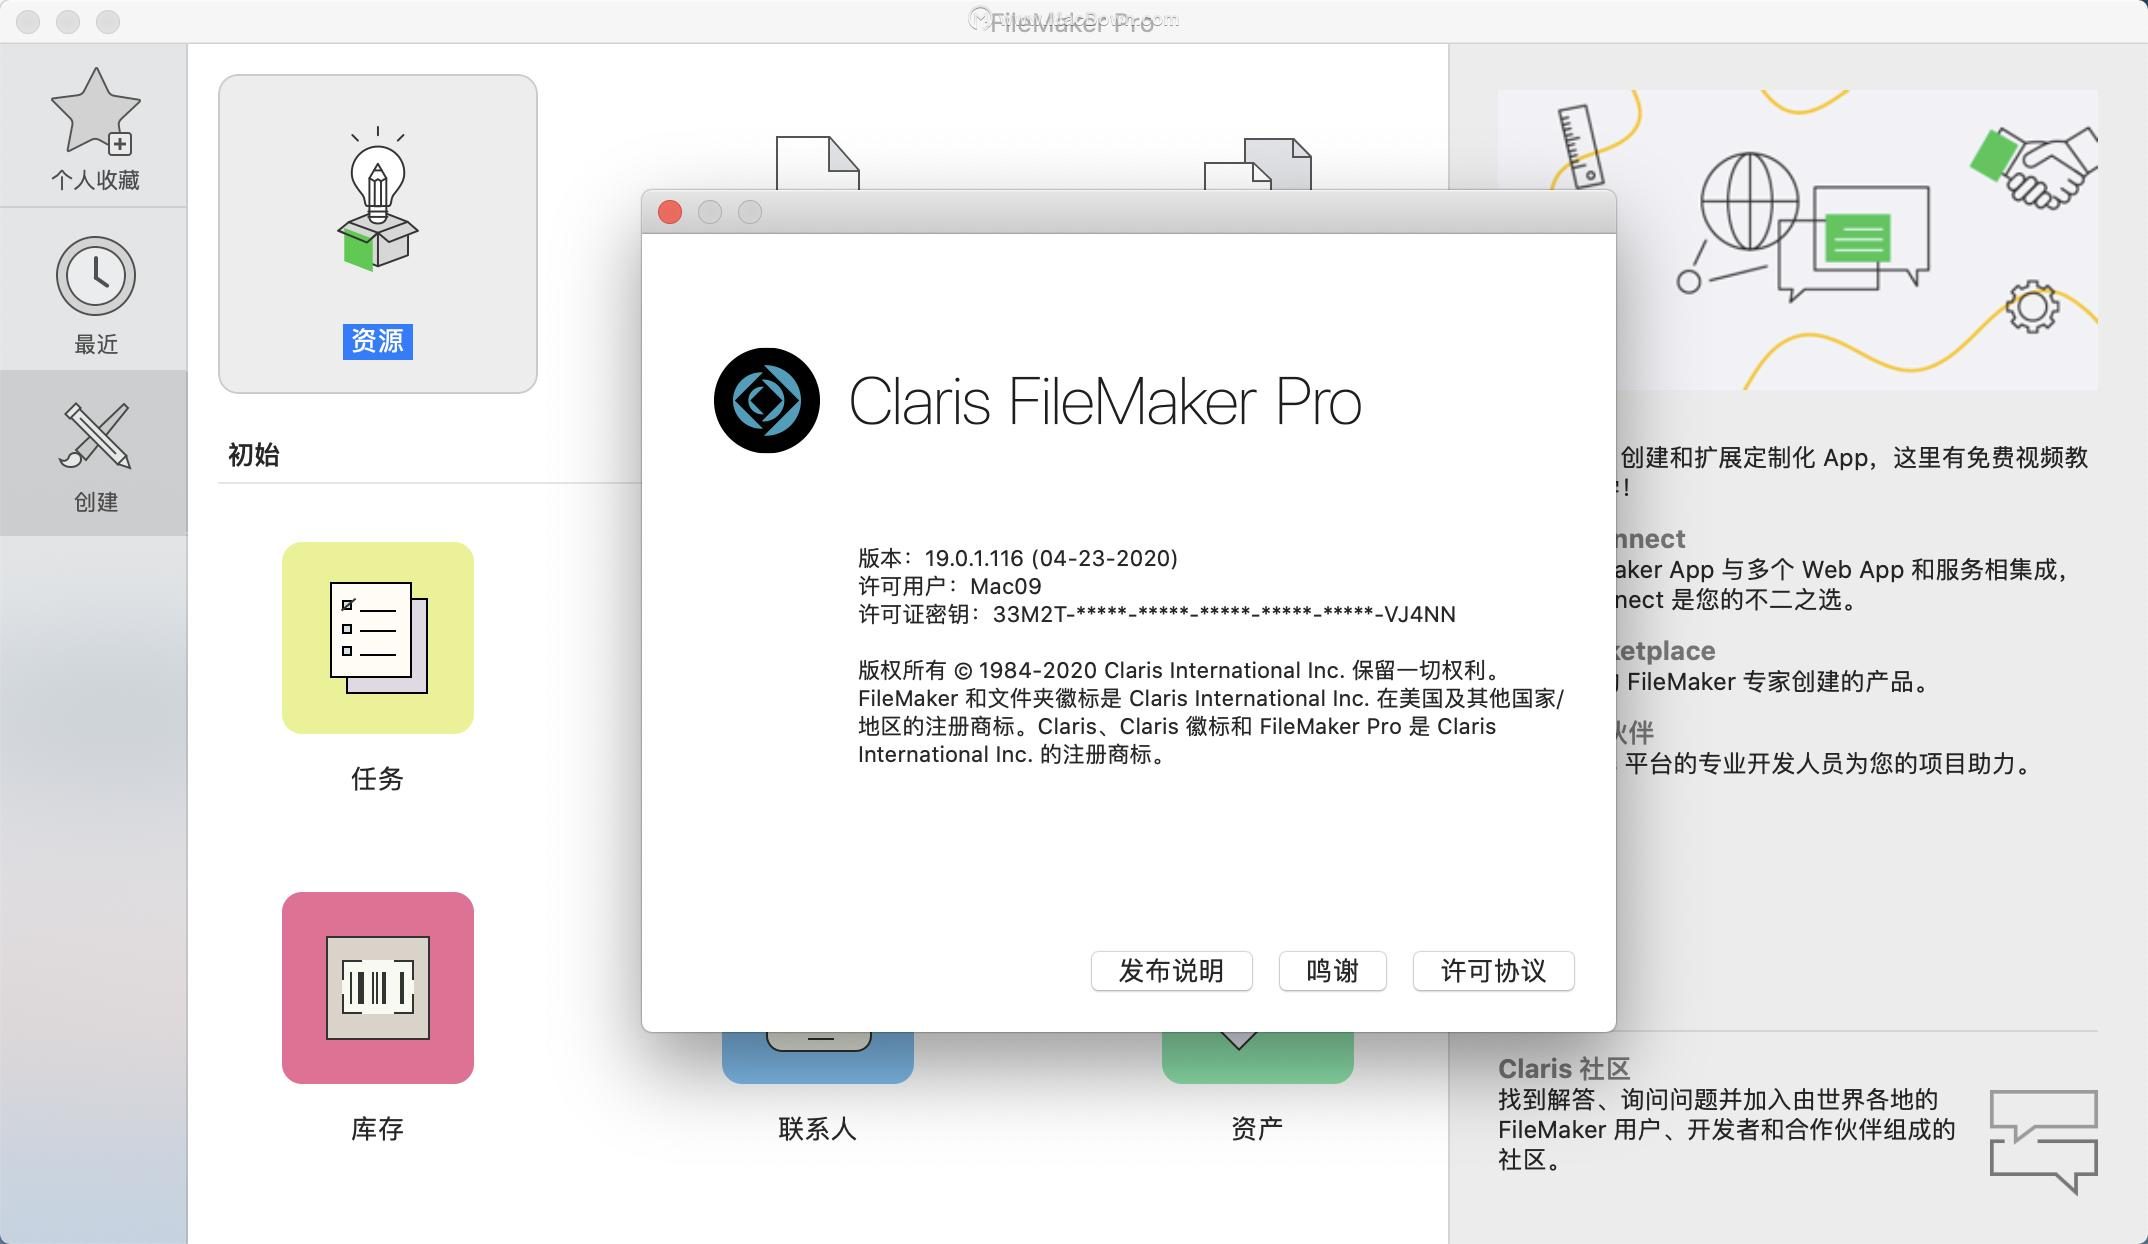 FileMaker Pro / Server 20.2.1.60 instal the new version for ios